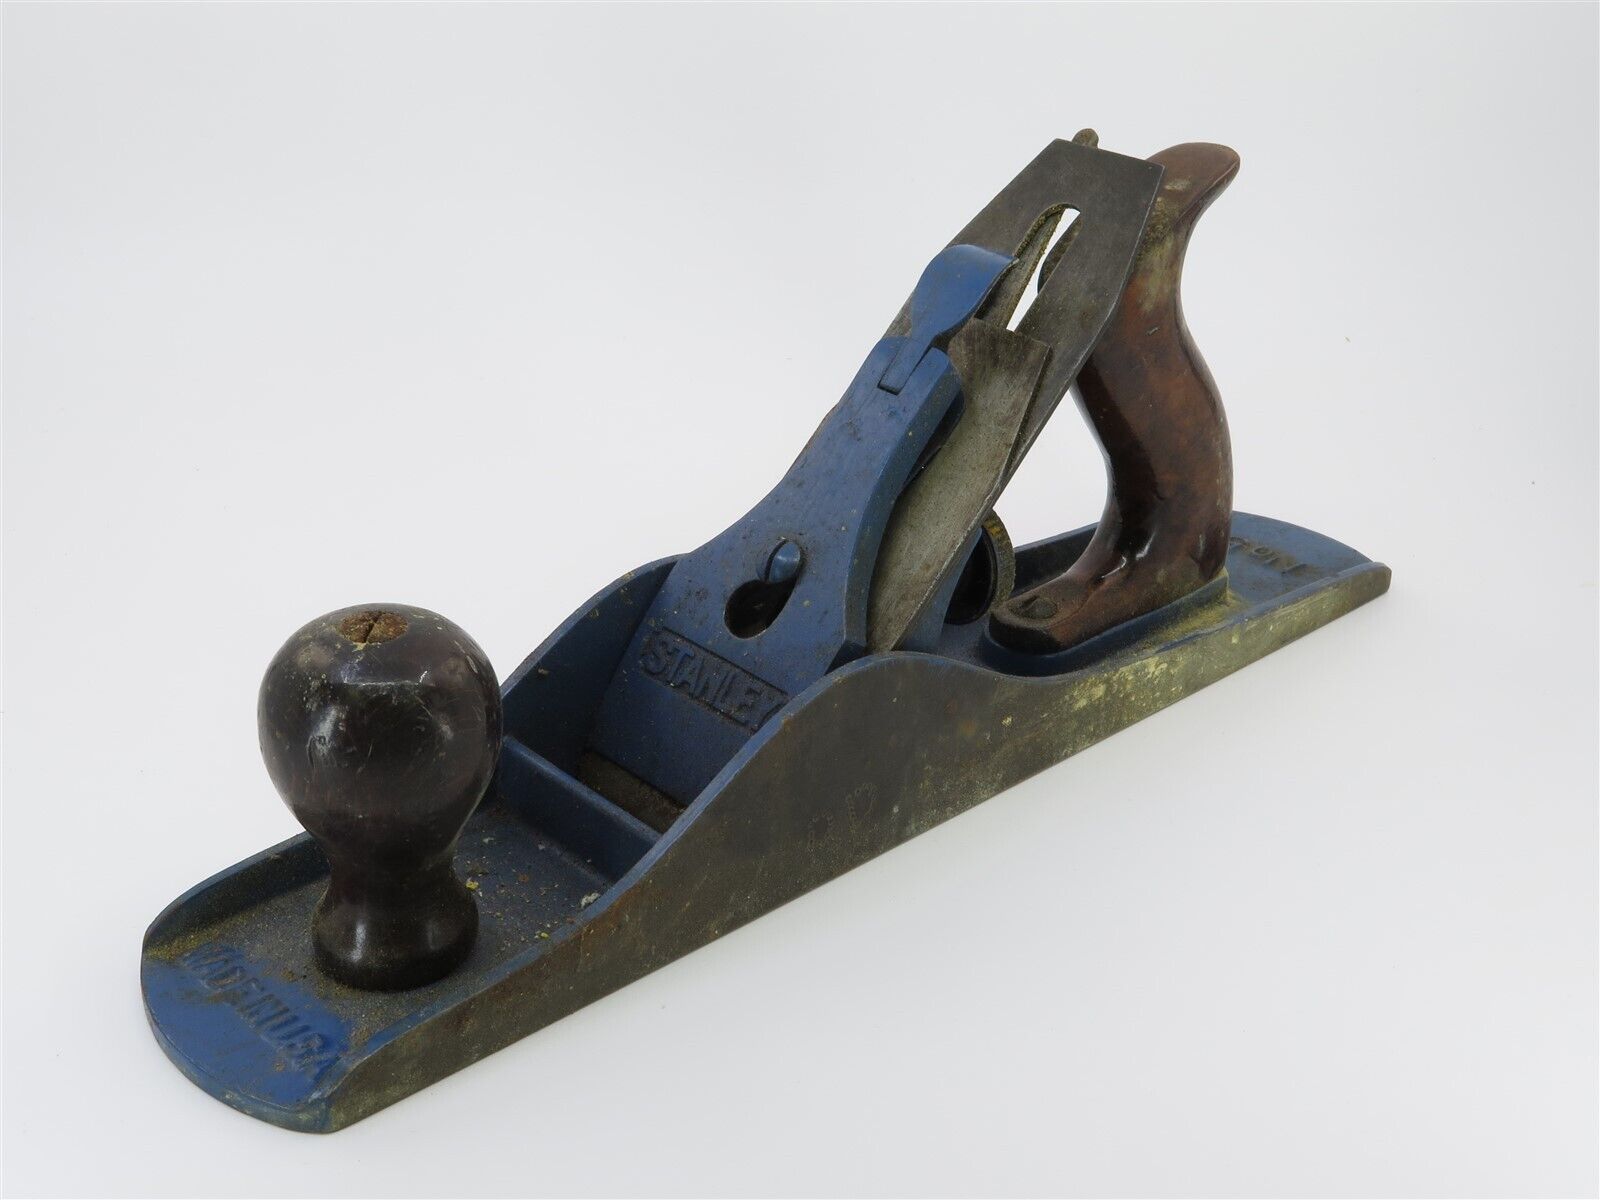 VTG Stanley No. 5 Smooth Sole Plane Made in USA Blue Top 13.75\